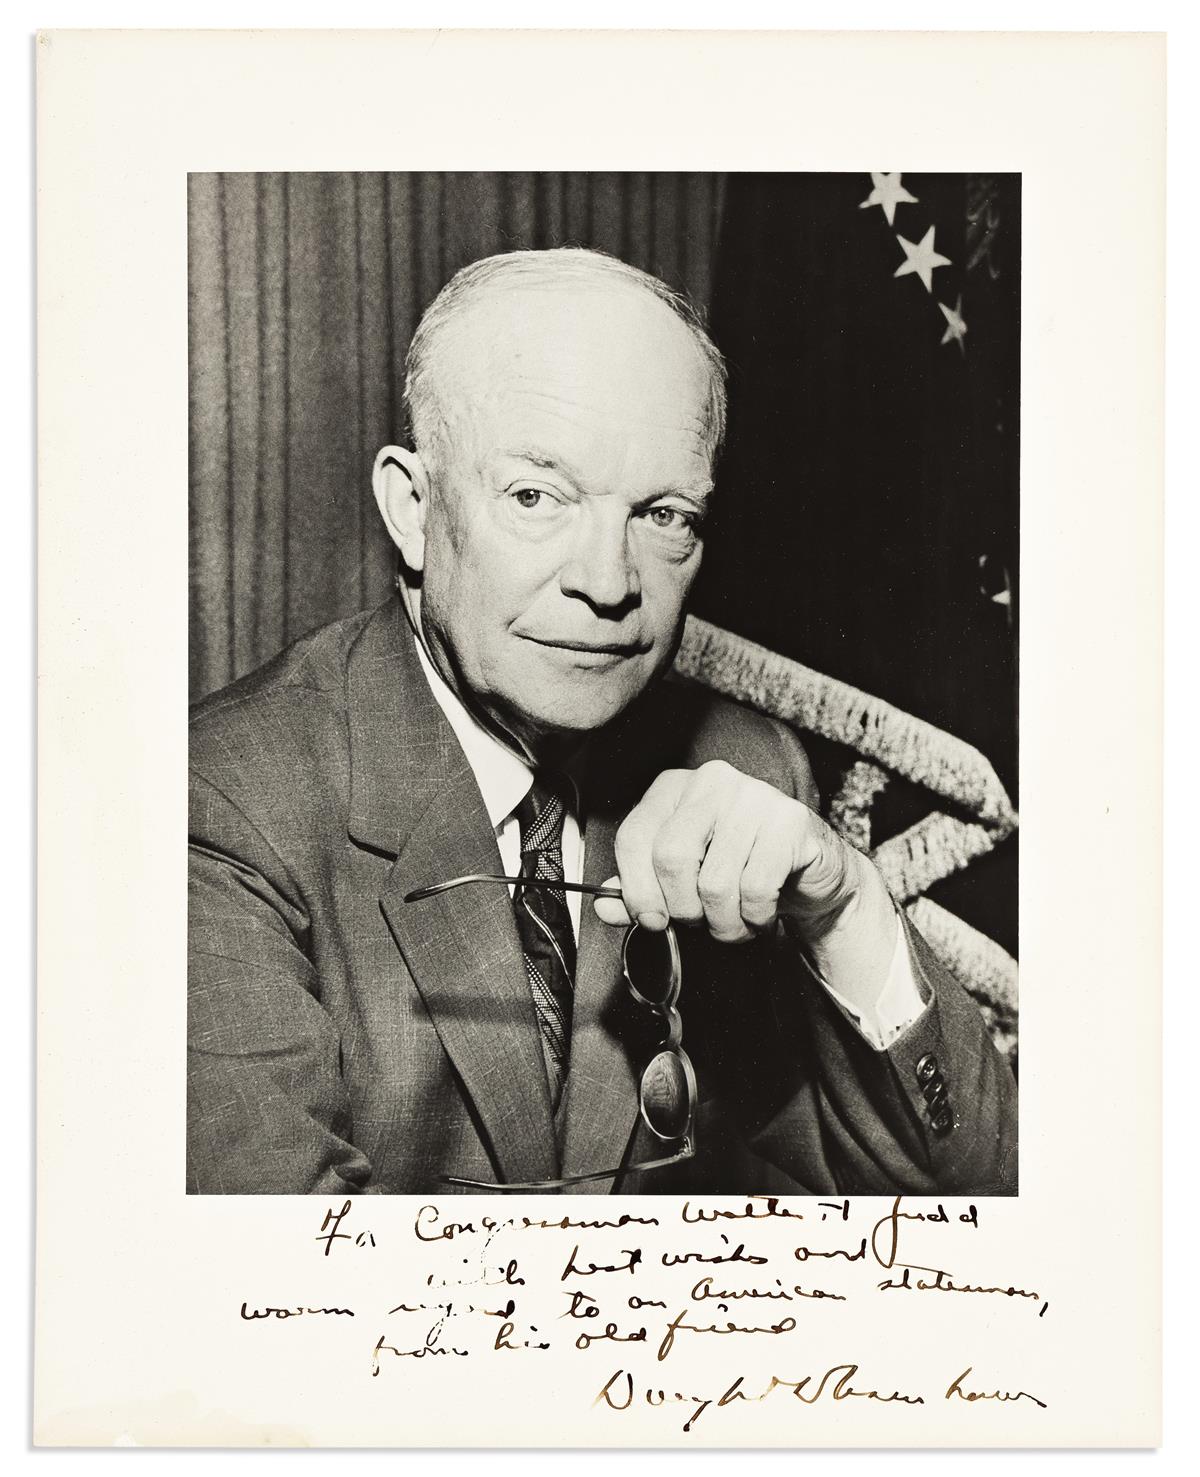 EISENHOWER, DWIGHT D. Large Photograph Signed and Inscribed, For Congressman Walter H. Judd / with best wishes and / warm regard to an